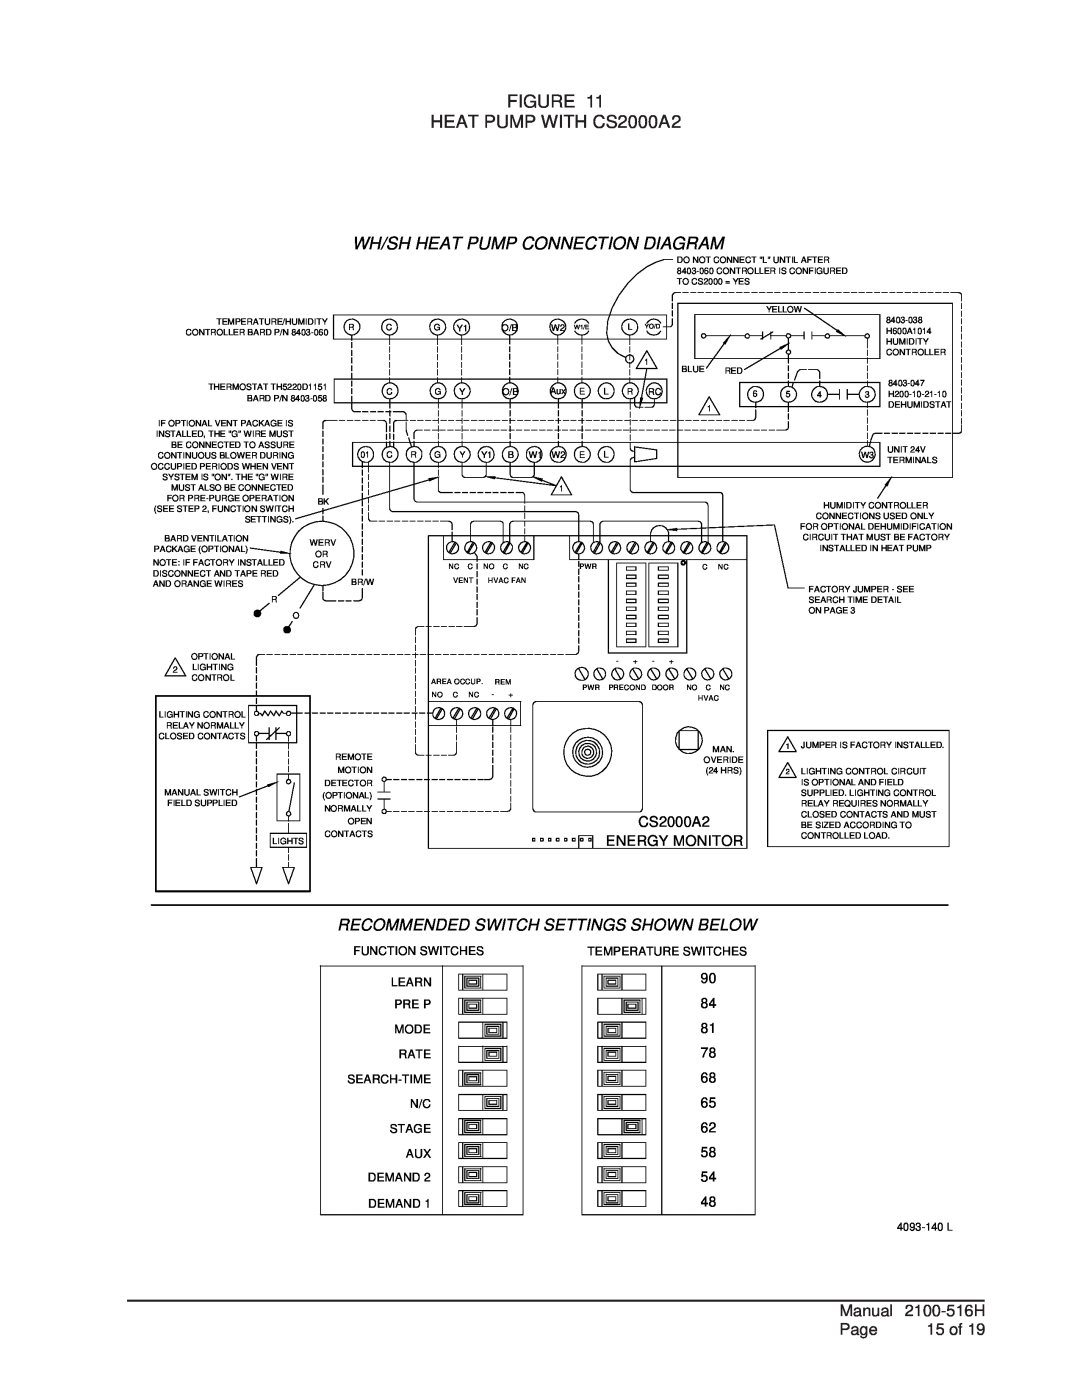 Bard W**H*D, S**H*D, T**H*D Wh/Sh Heat Pump Connection Diagram, Recommended Switch Settings Shown Below 